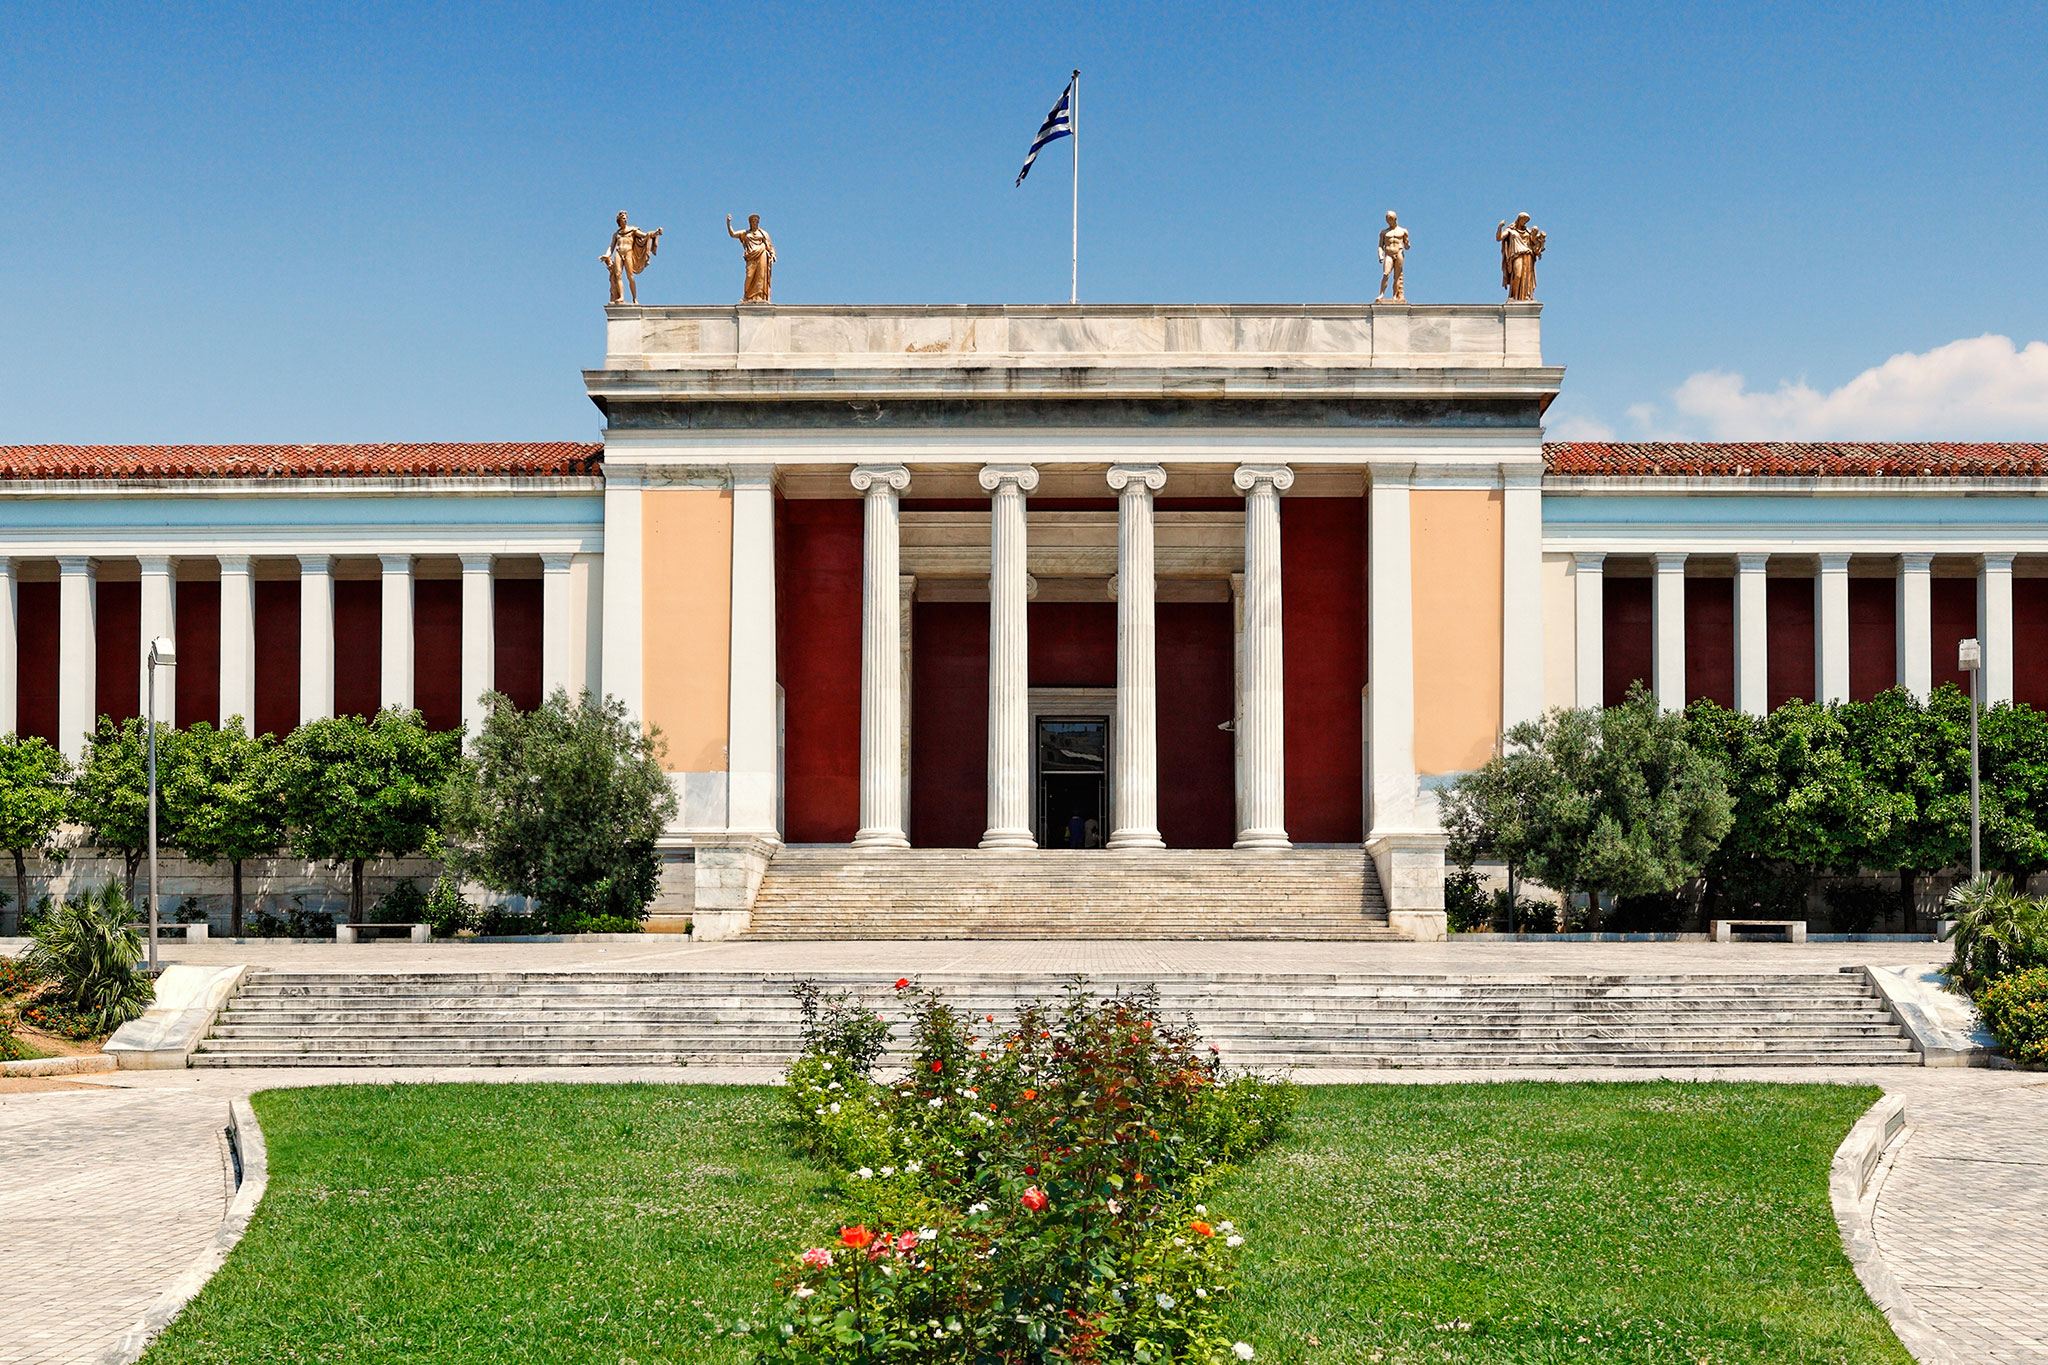 The National Archaeological Museum in Athens, Greece, has classical columns, red walls, a Greek flag, and statues atop the entrance under a blue sky.